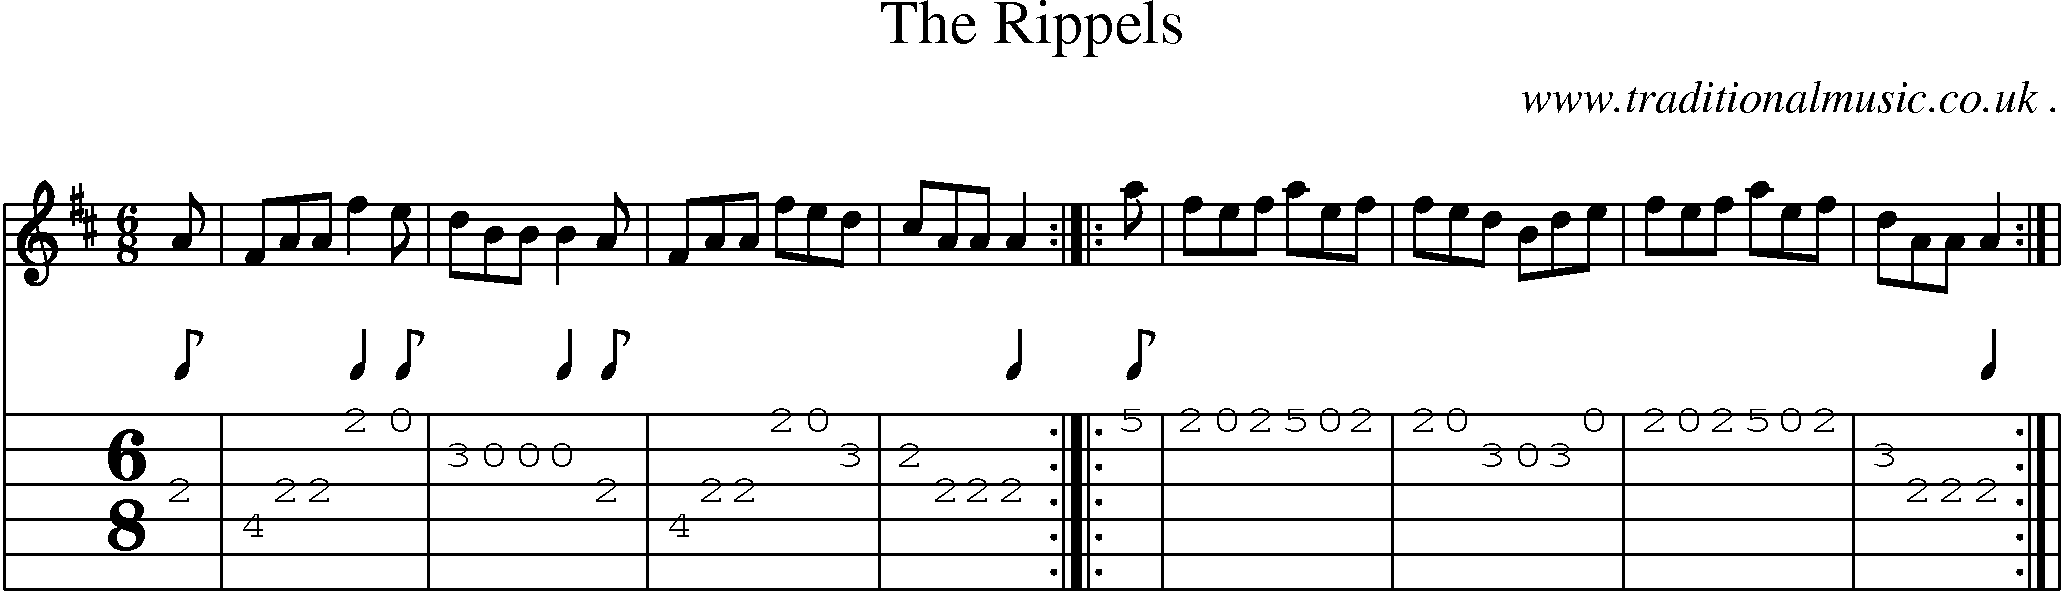 Sheet-Music and Guitar Tabs for The Rippels